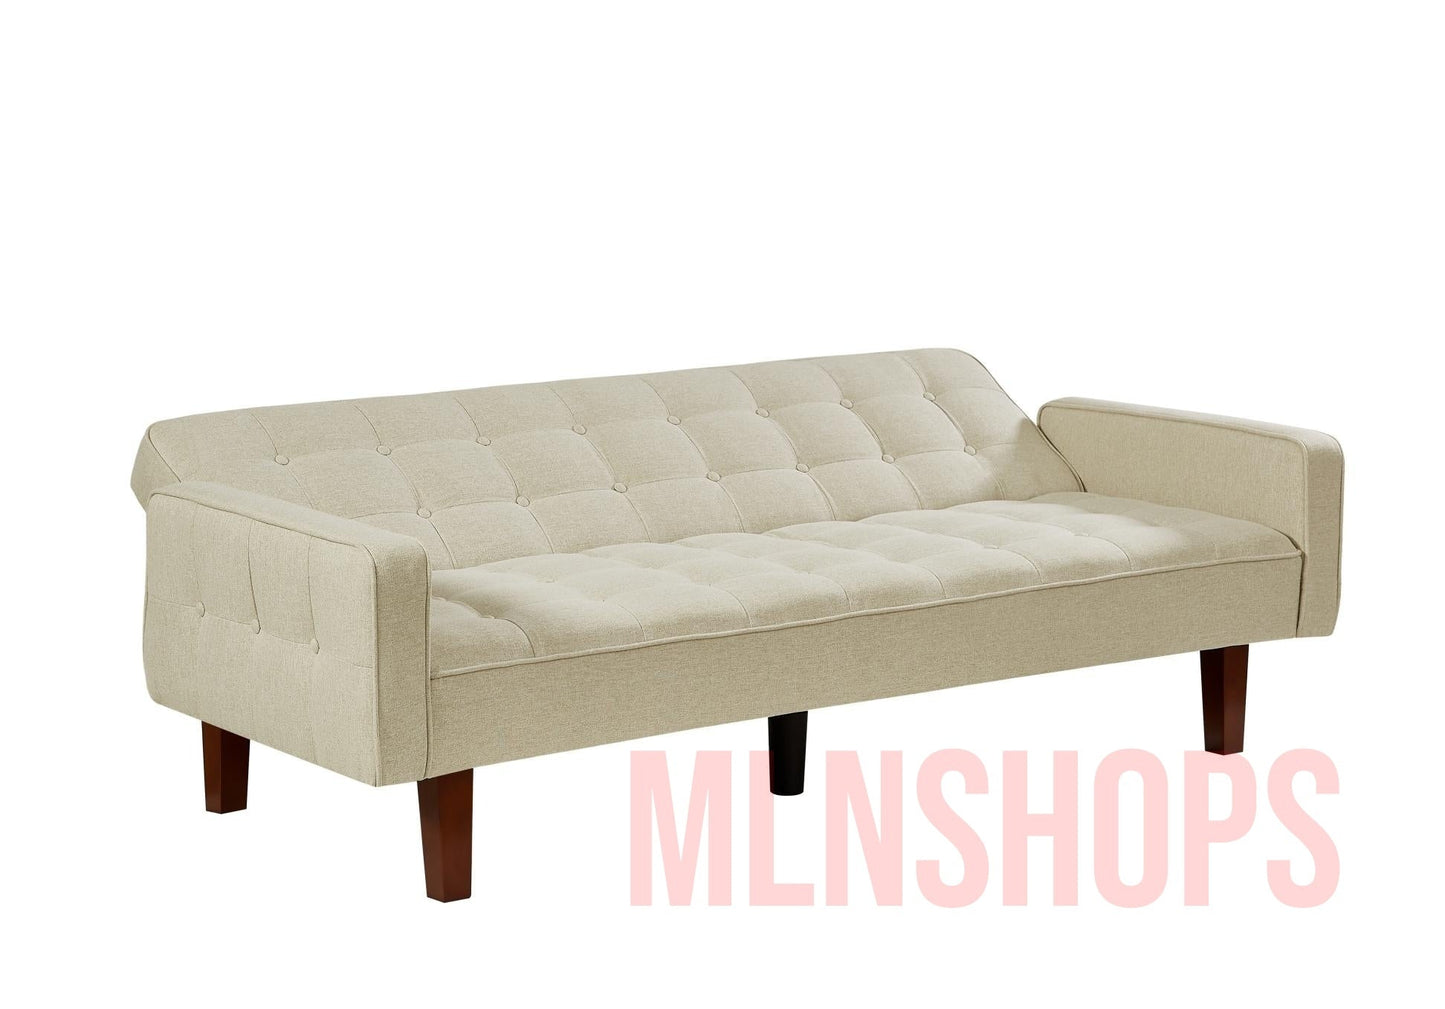 Beige, Linen Futon Sofa Bed 73.62 Inch Fabric Upholstered Convertible Sofa Bed, Minimalist Style for Living Room, Bedroom.